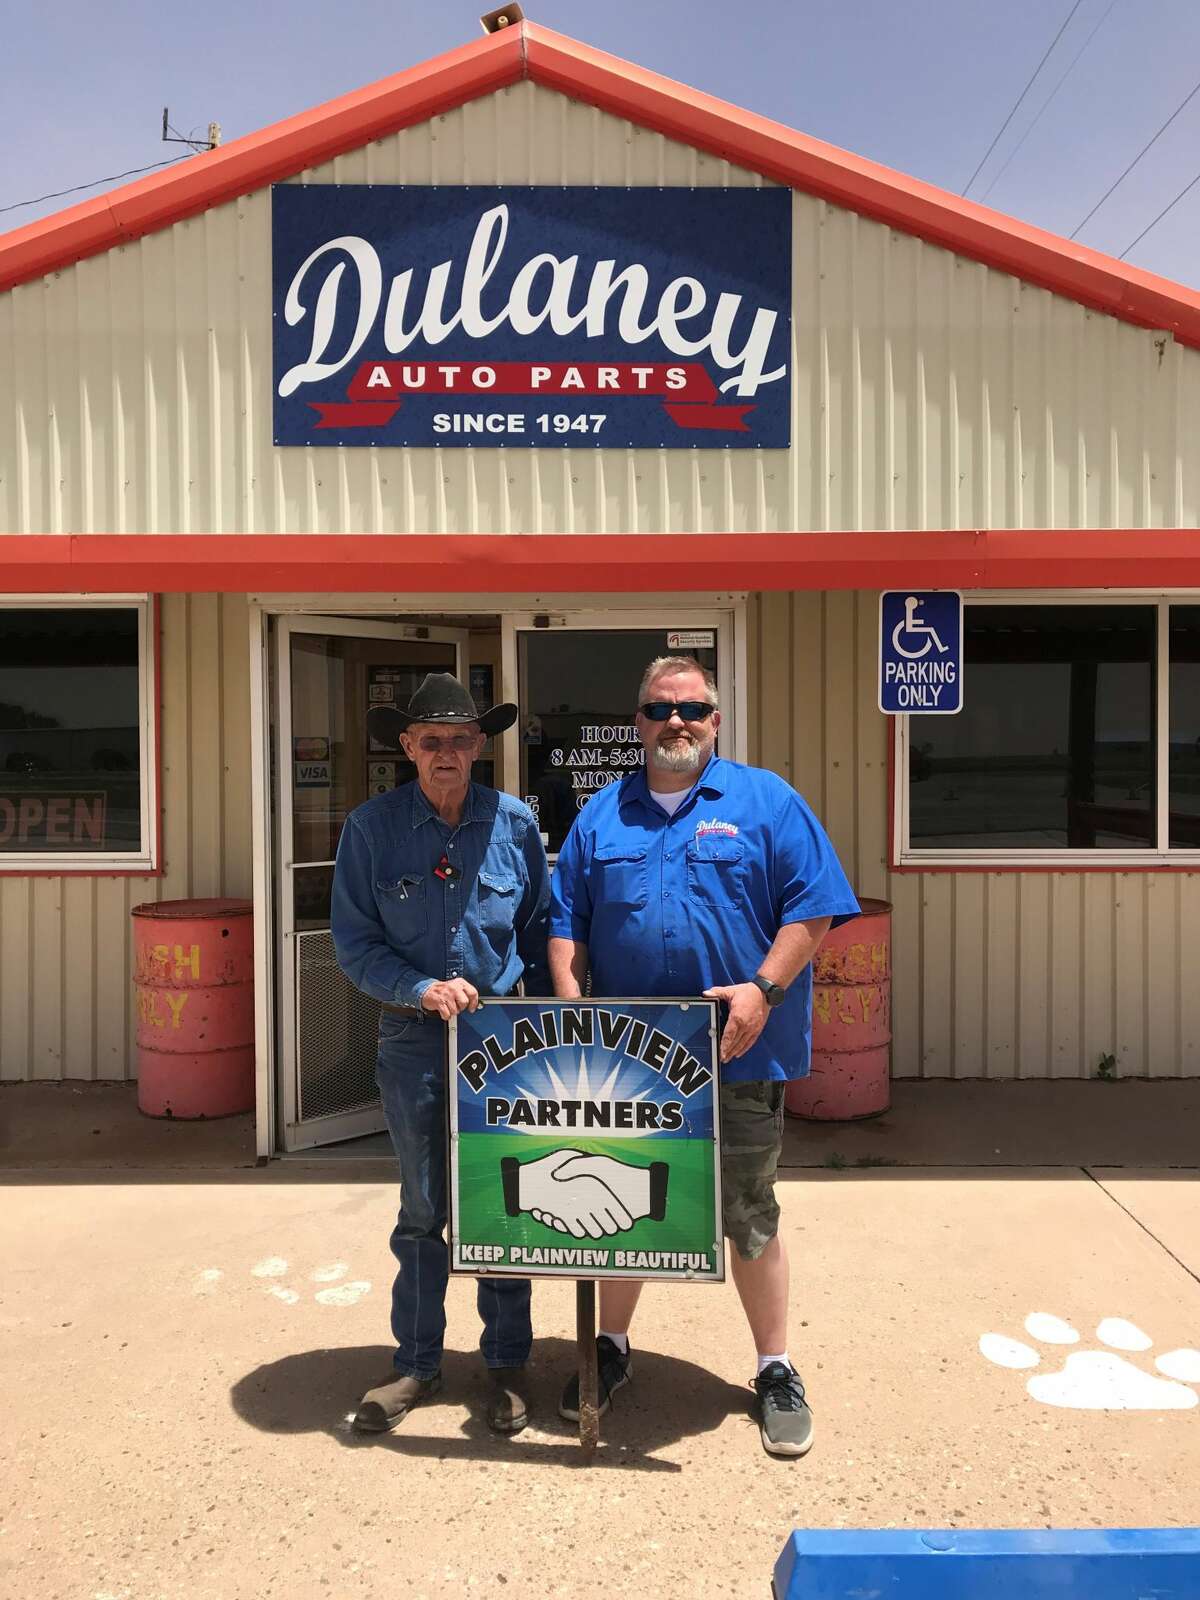 Keep Plainview Beautiful Partners Award: Dulaney Auto Parts – (pictured L-R) Herman Lindeman and Cody Lindeman